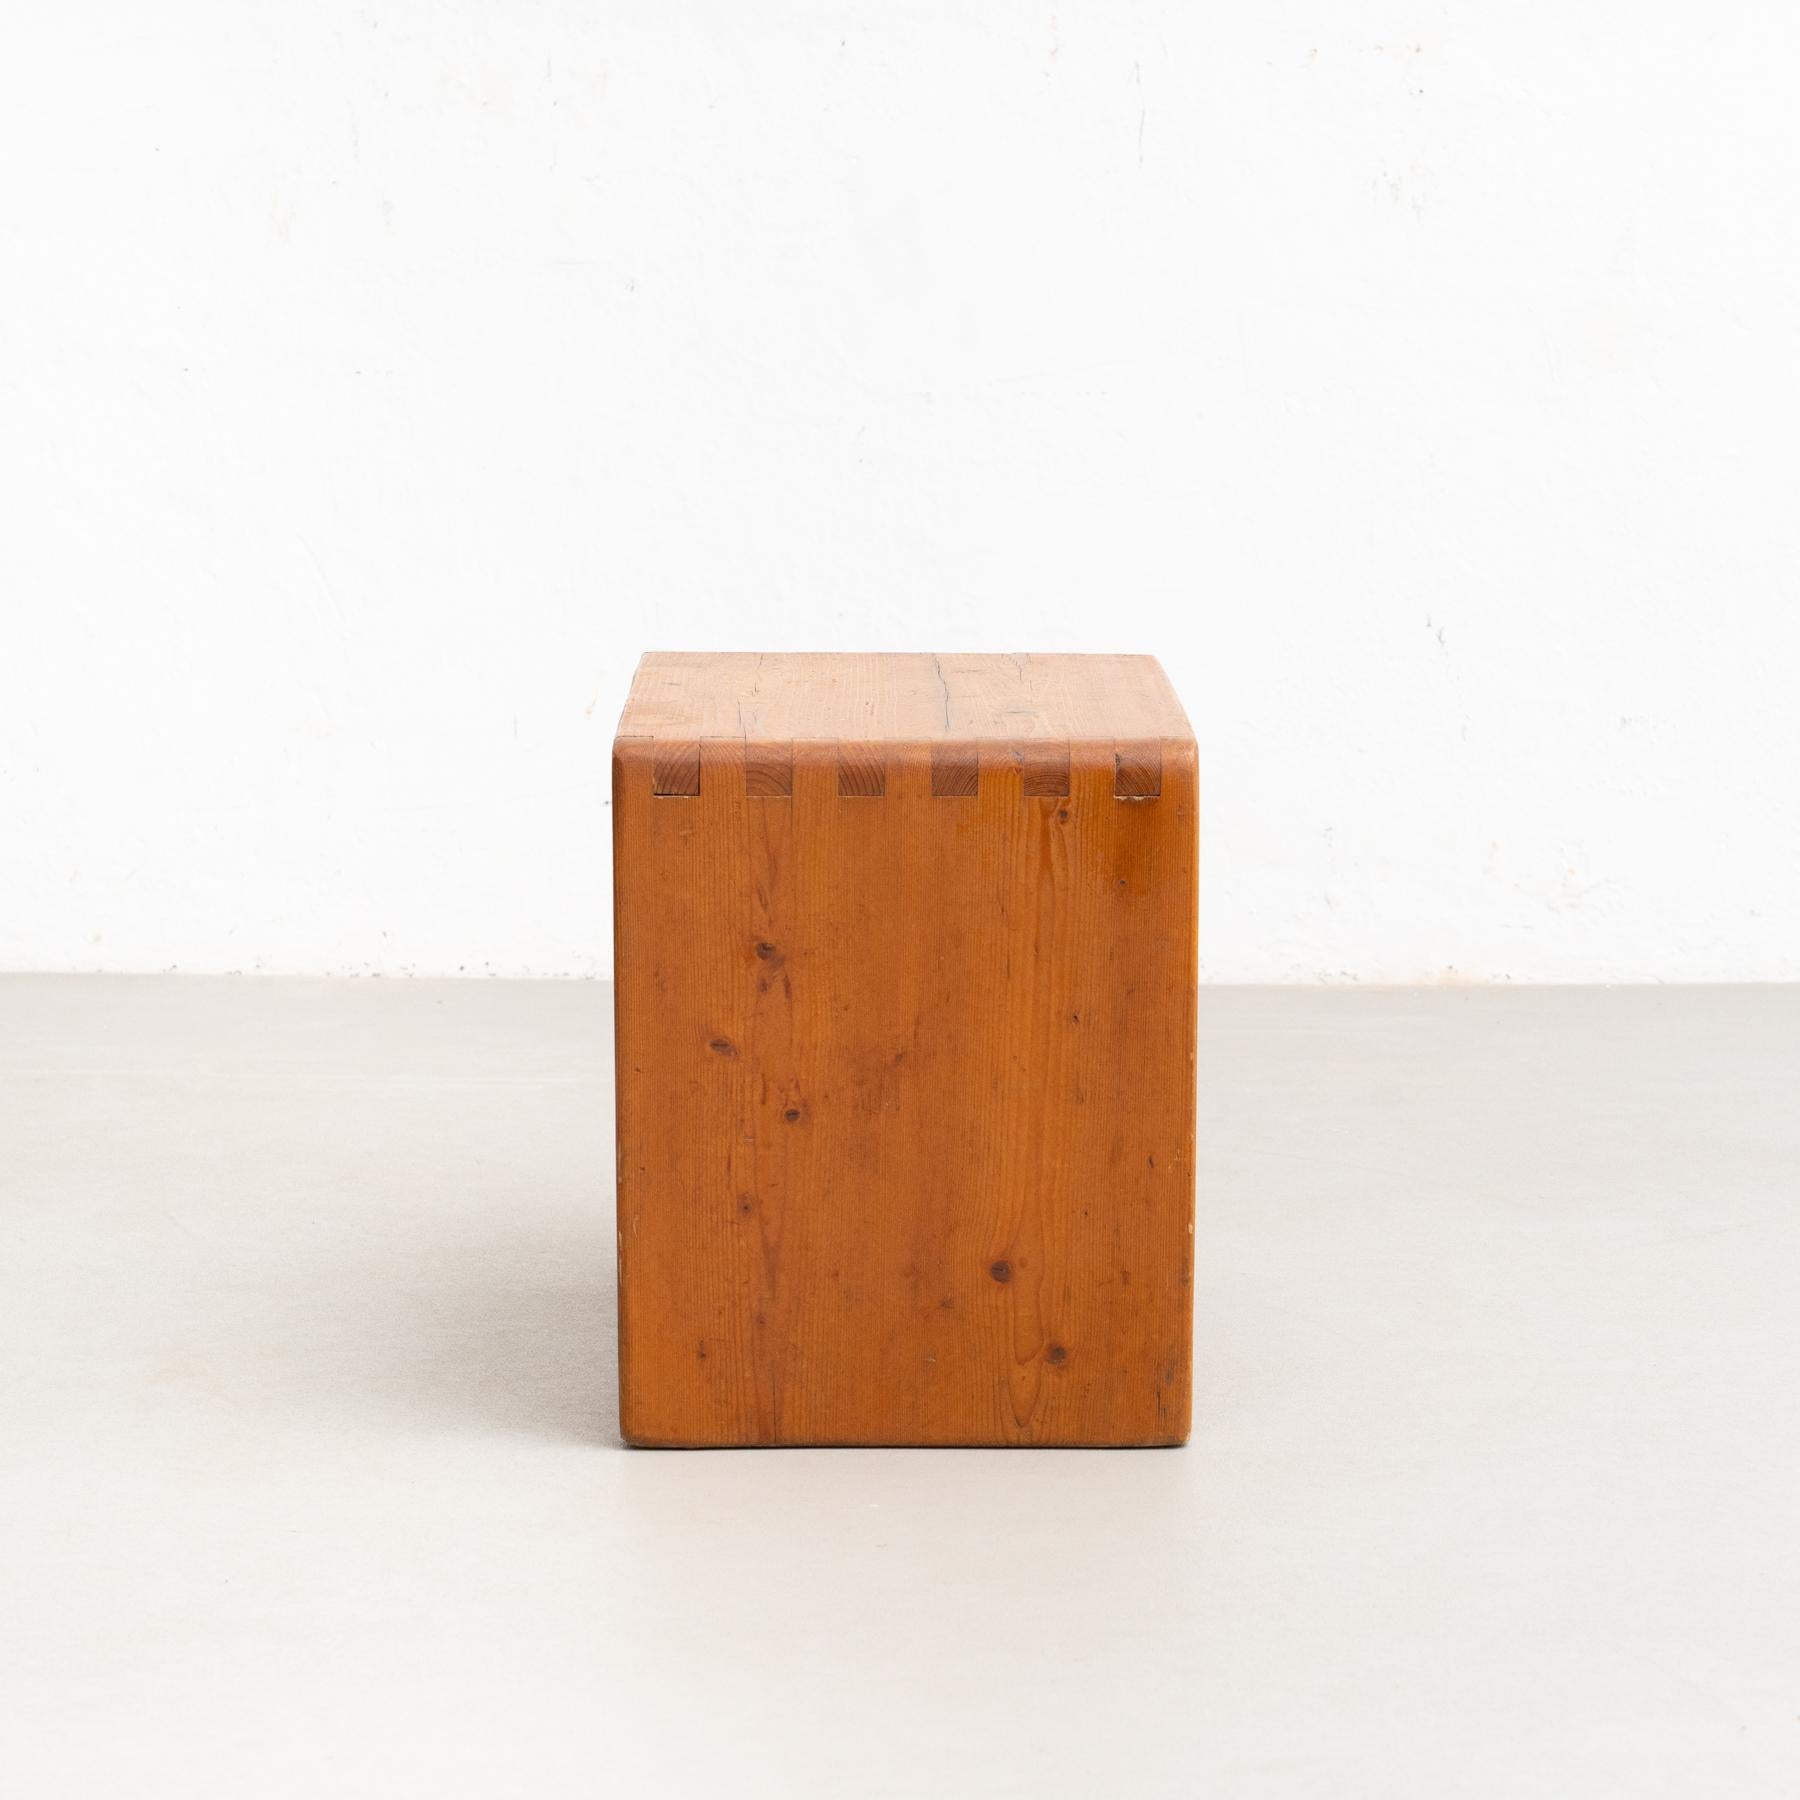 French Charlotte Perriand Pine Wood Stool for Les Arcs, circa 1950 For Sale